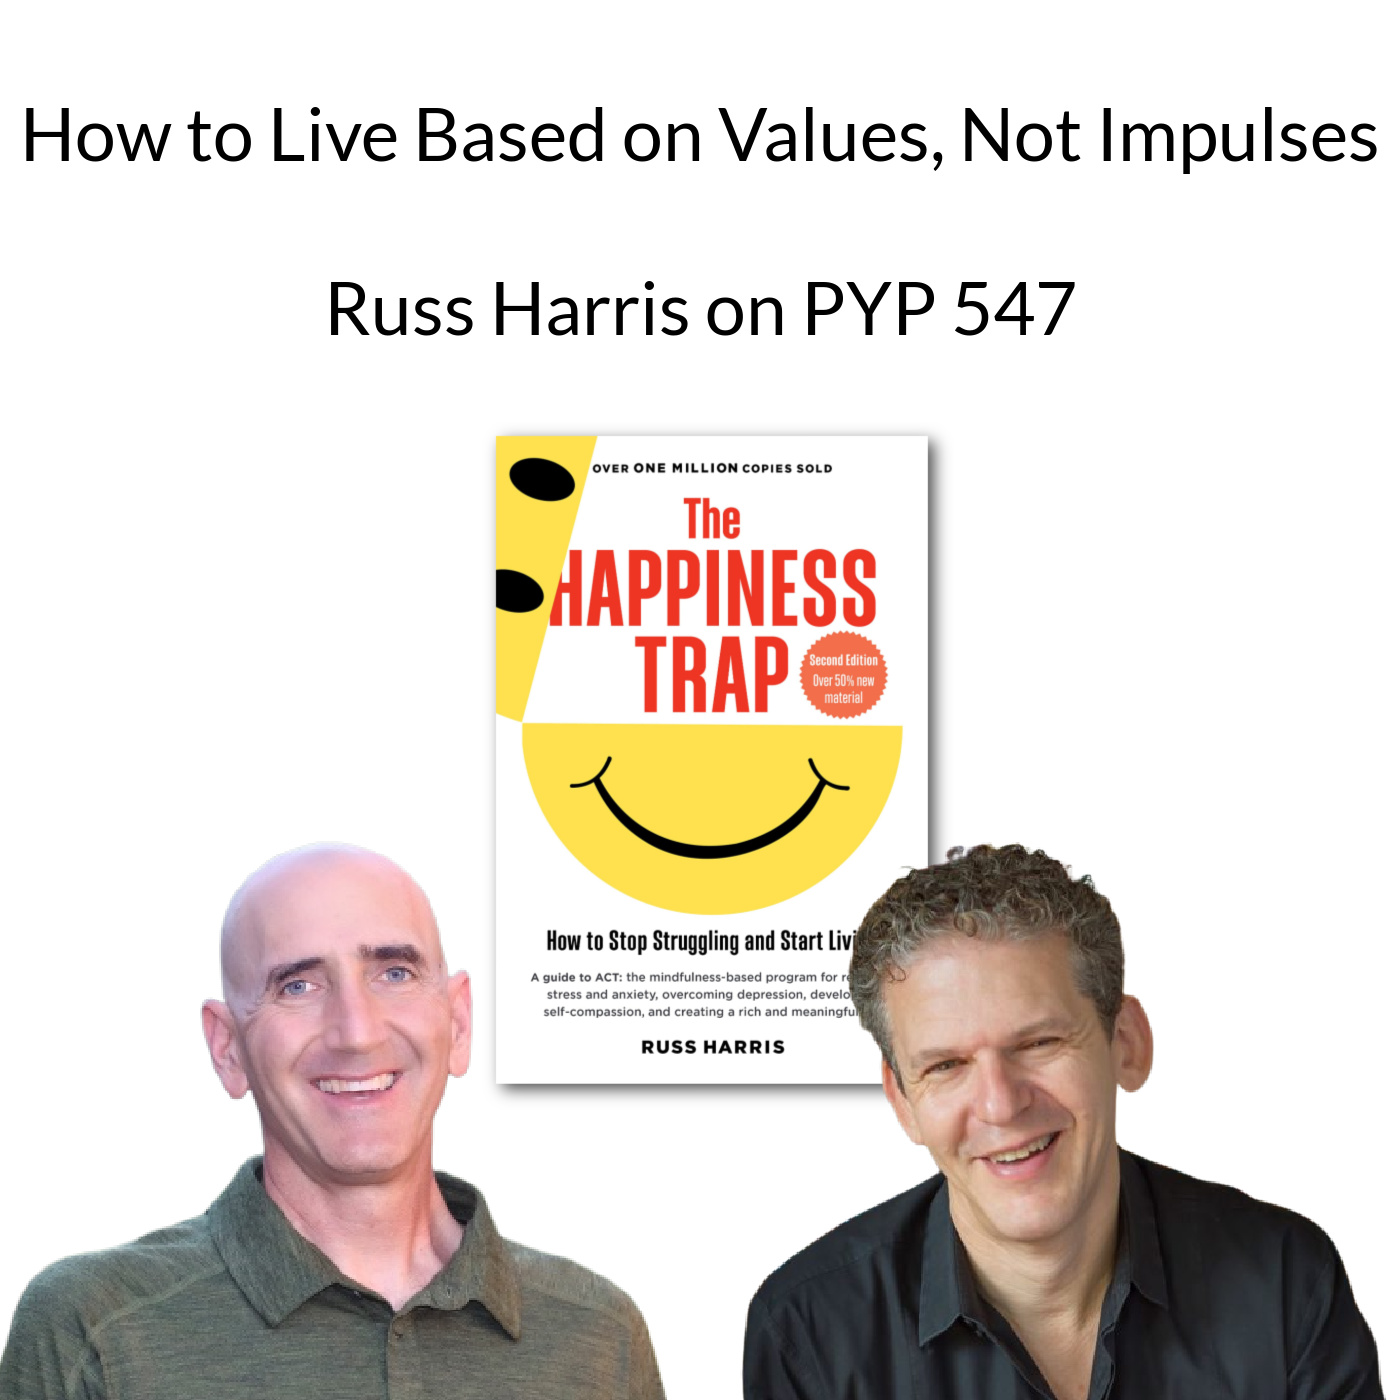 How to Live Based on Values, Not Impulses: Russ Harris on PYP 547